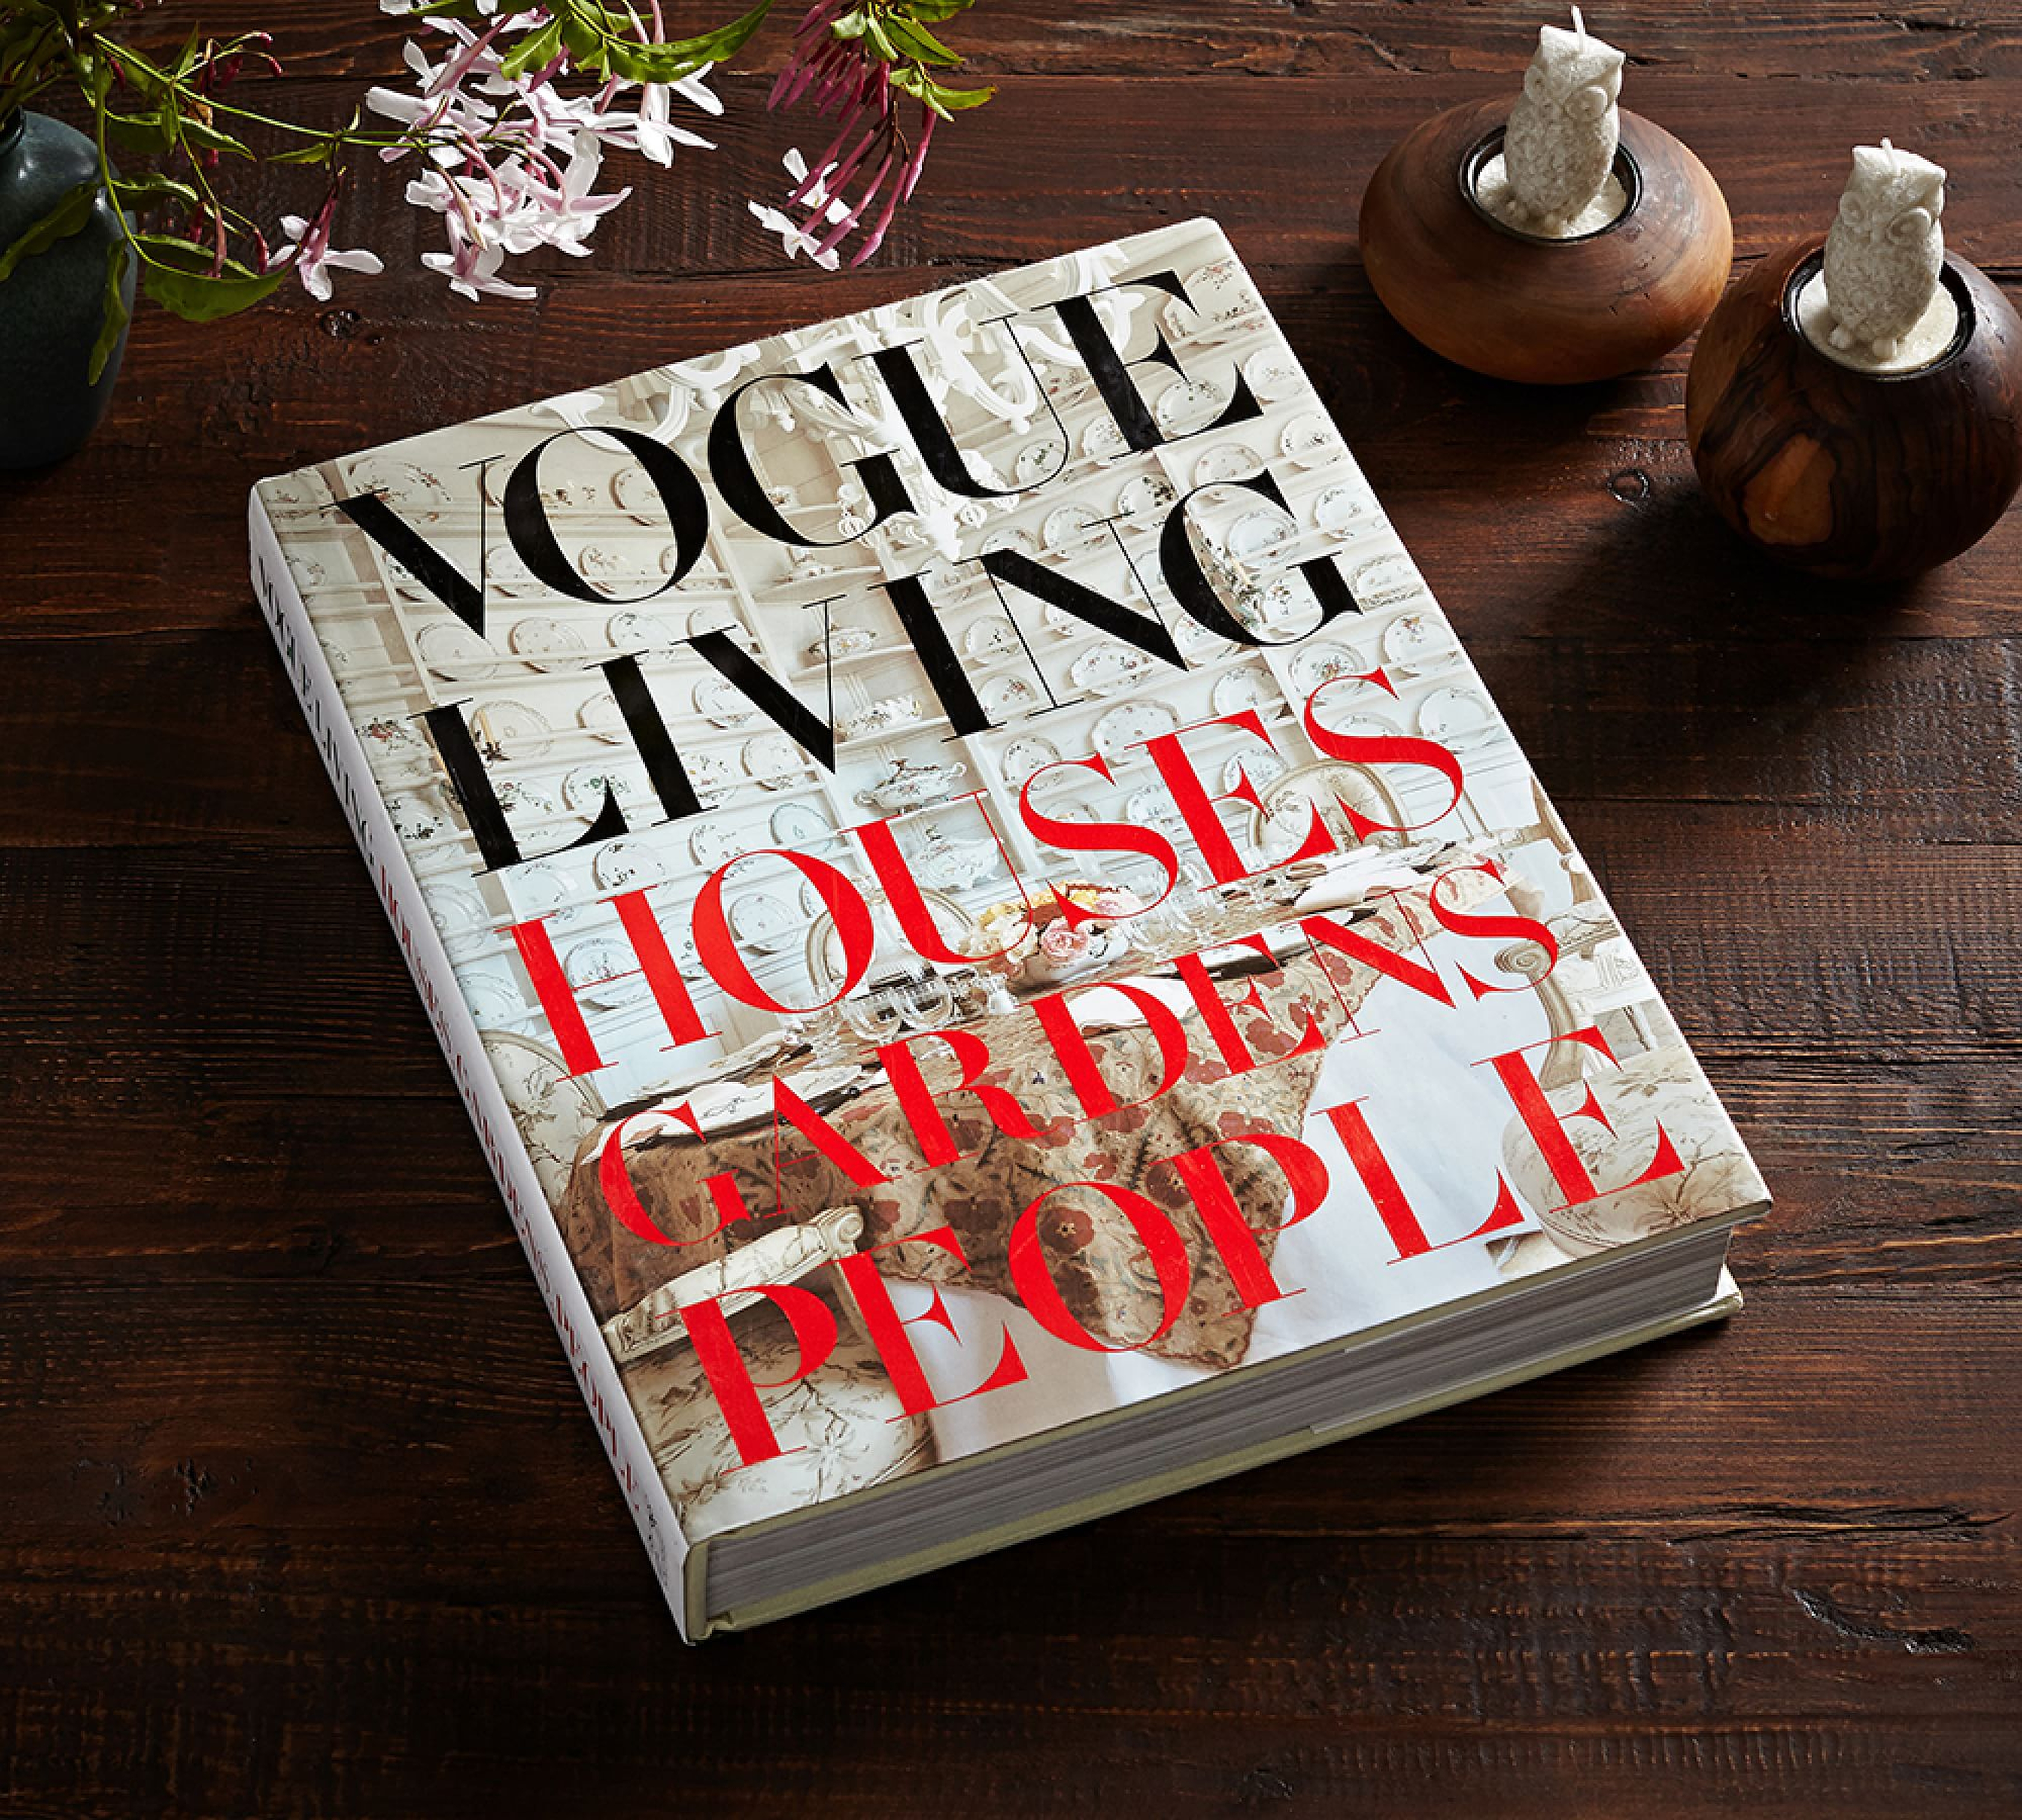 Vogue Living-Houses, Gardens and People - Pottery Barn